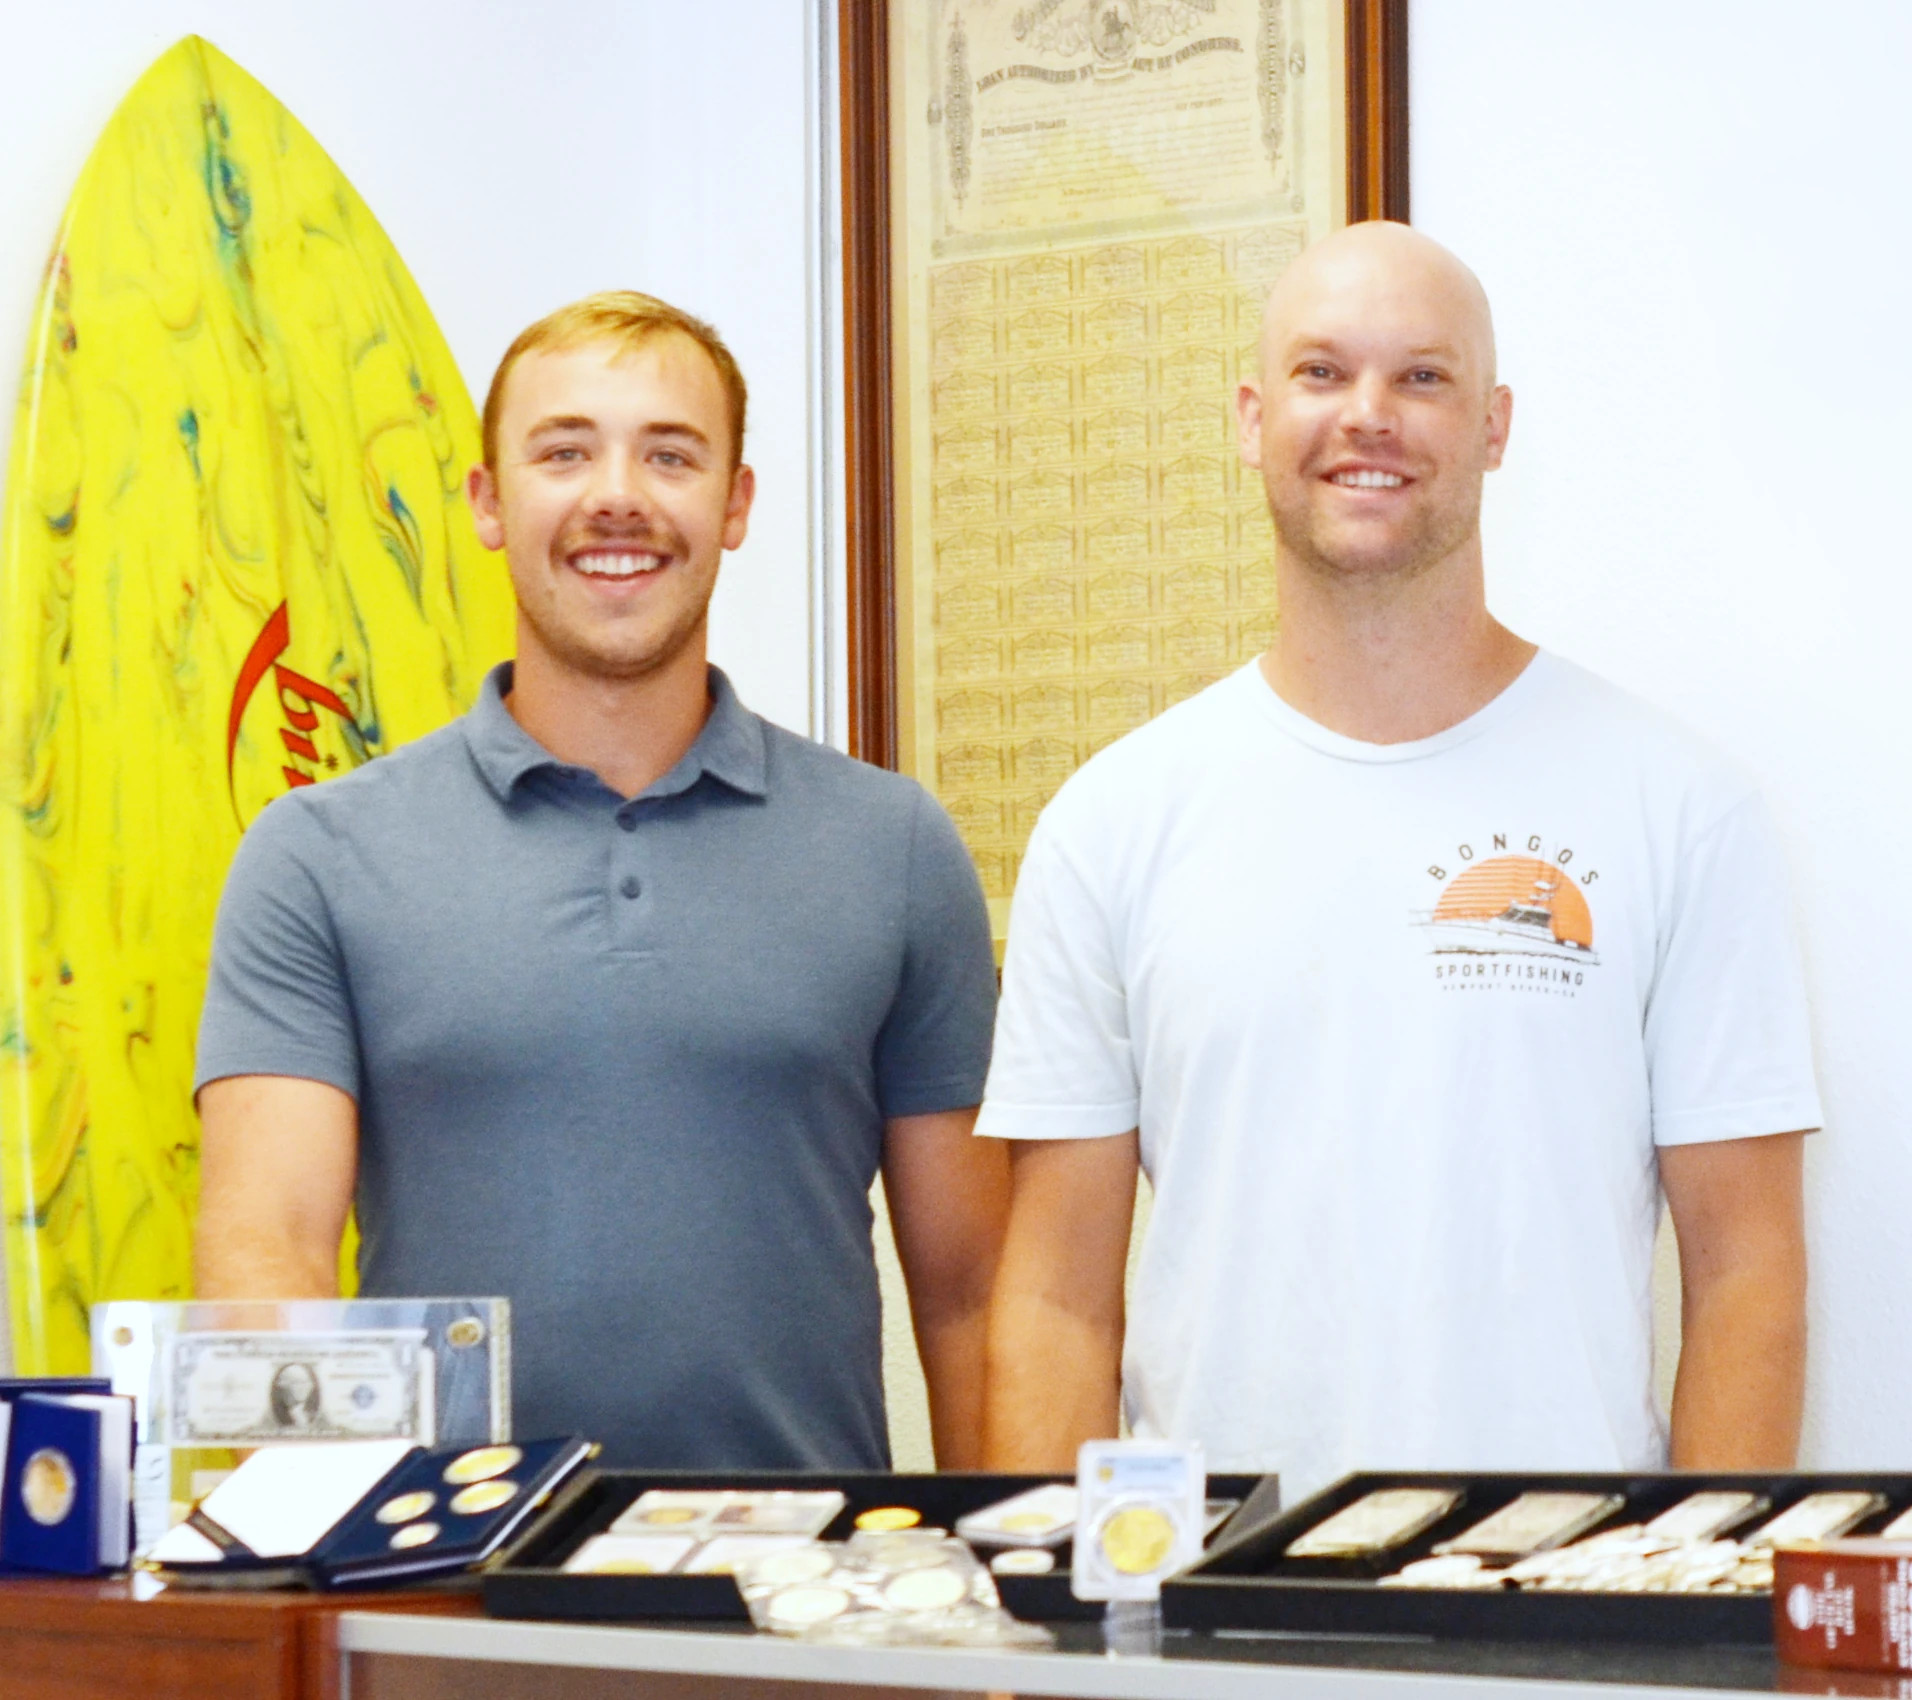 Palos Verdes Coin Exchange - Ron & Vince - owners of PV Coin Exchange